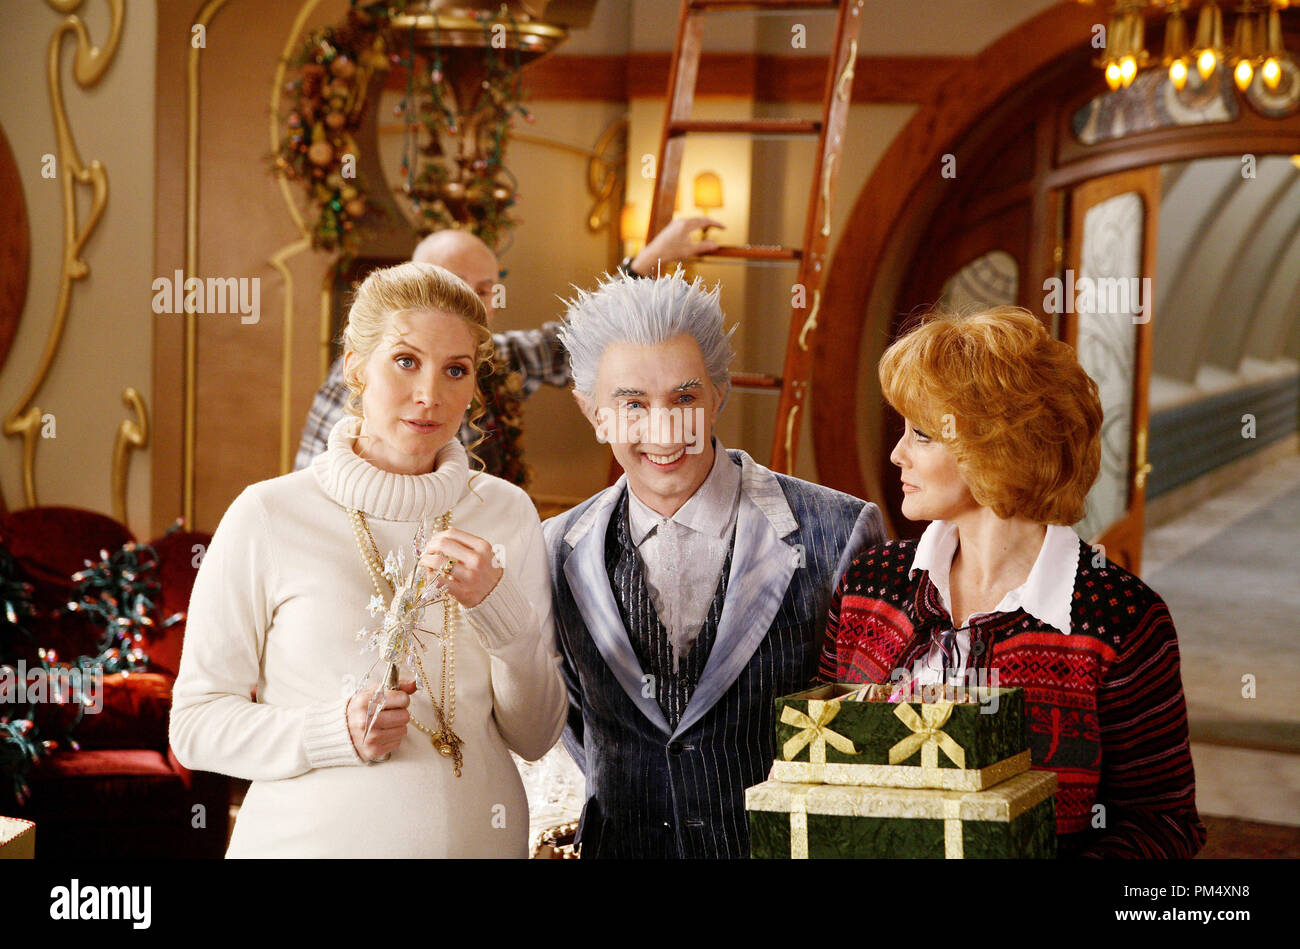 Studio Publicity Still from 'The Santa Clause 3: The Escape Clause' Elizabeth Mitchell, Alan Arkin, Martin Short, Ann-Margret © 2006 Disney Enterprises, Inc. Photo credit: Joseph Lederer   File Reference # 307372600THA  For Editorial Use Only -  All Rights Reserved Stock Photo